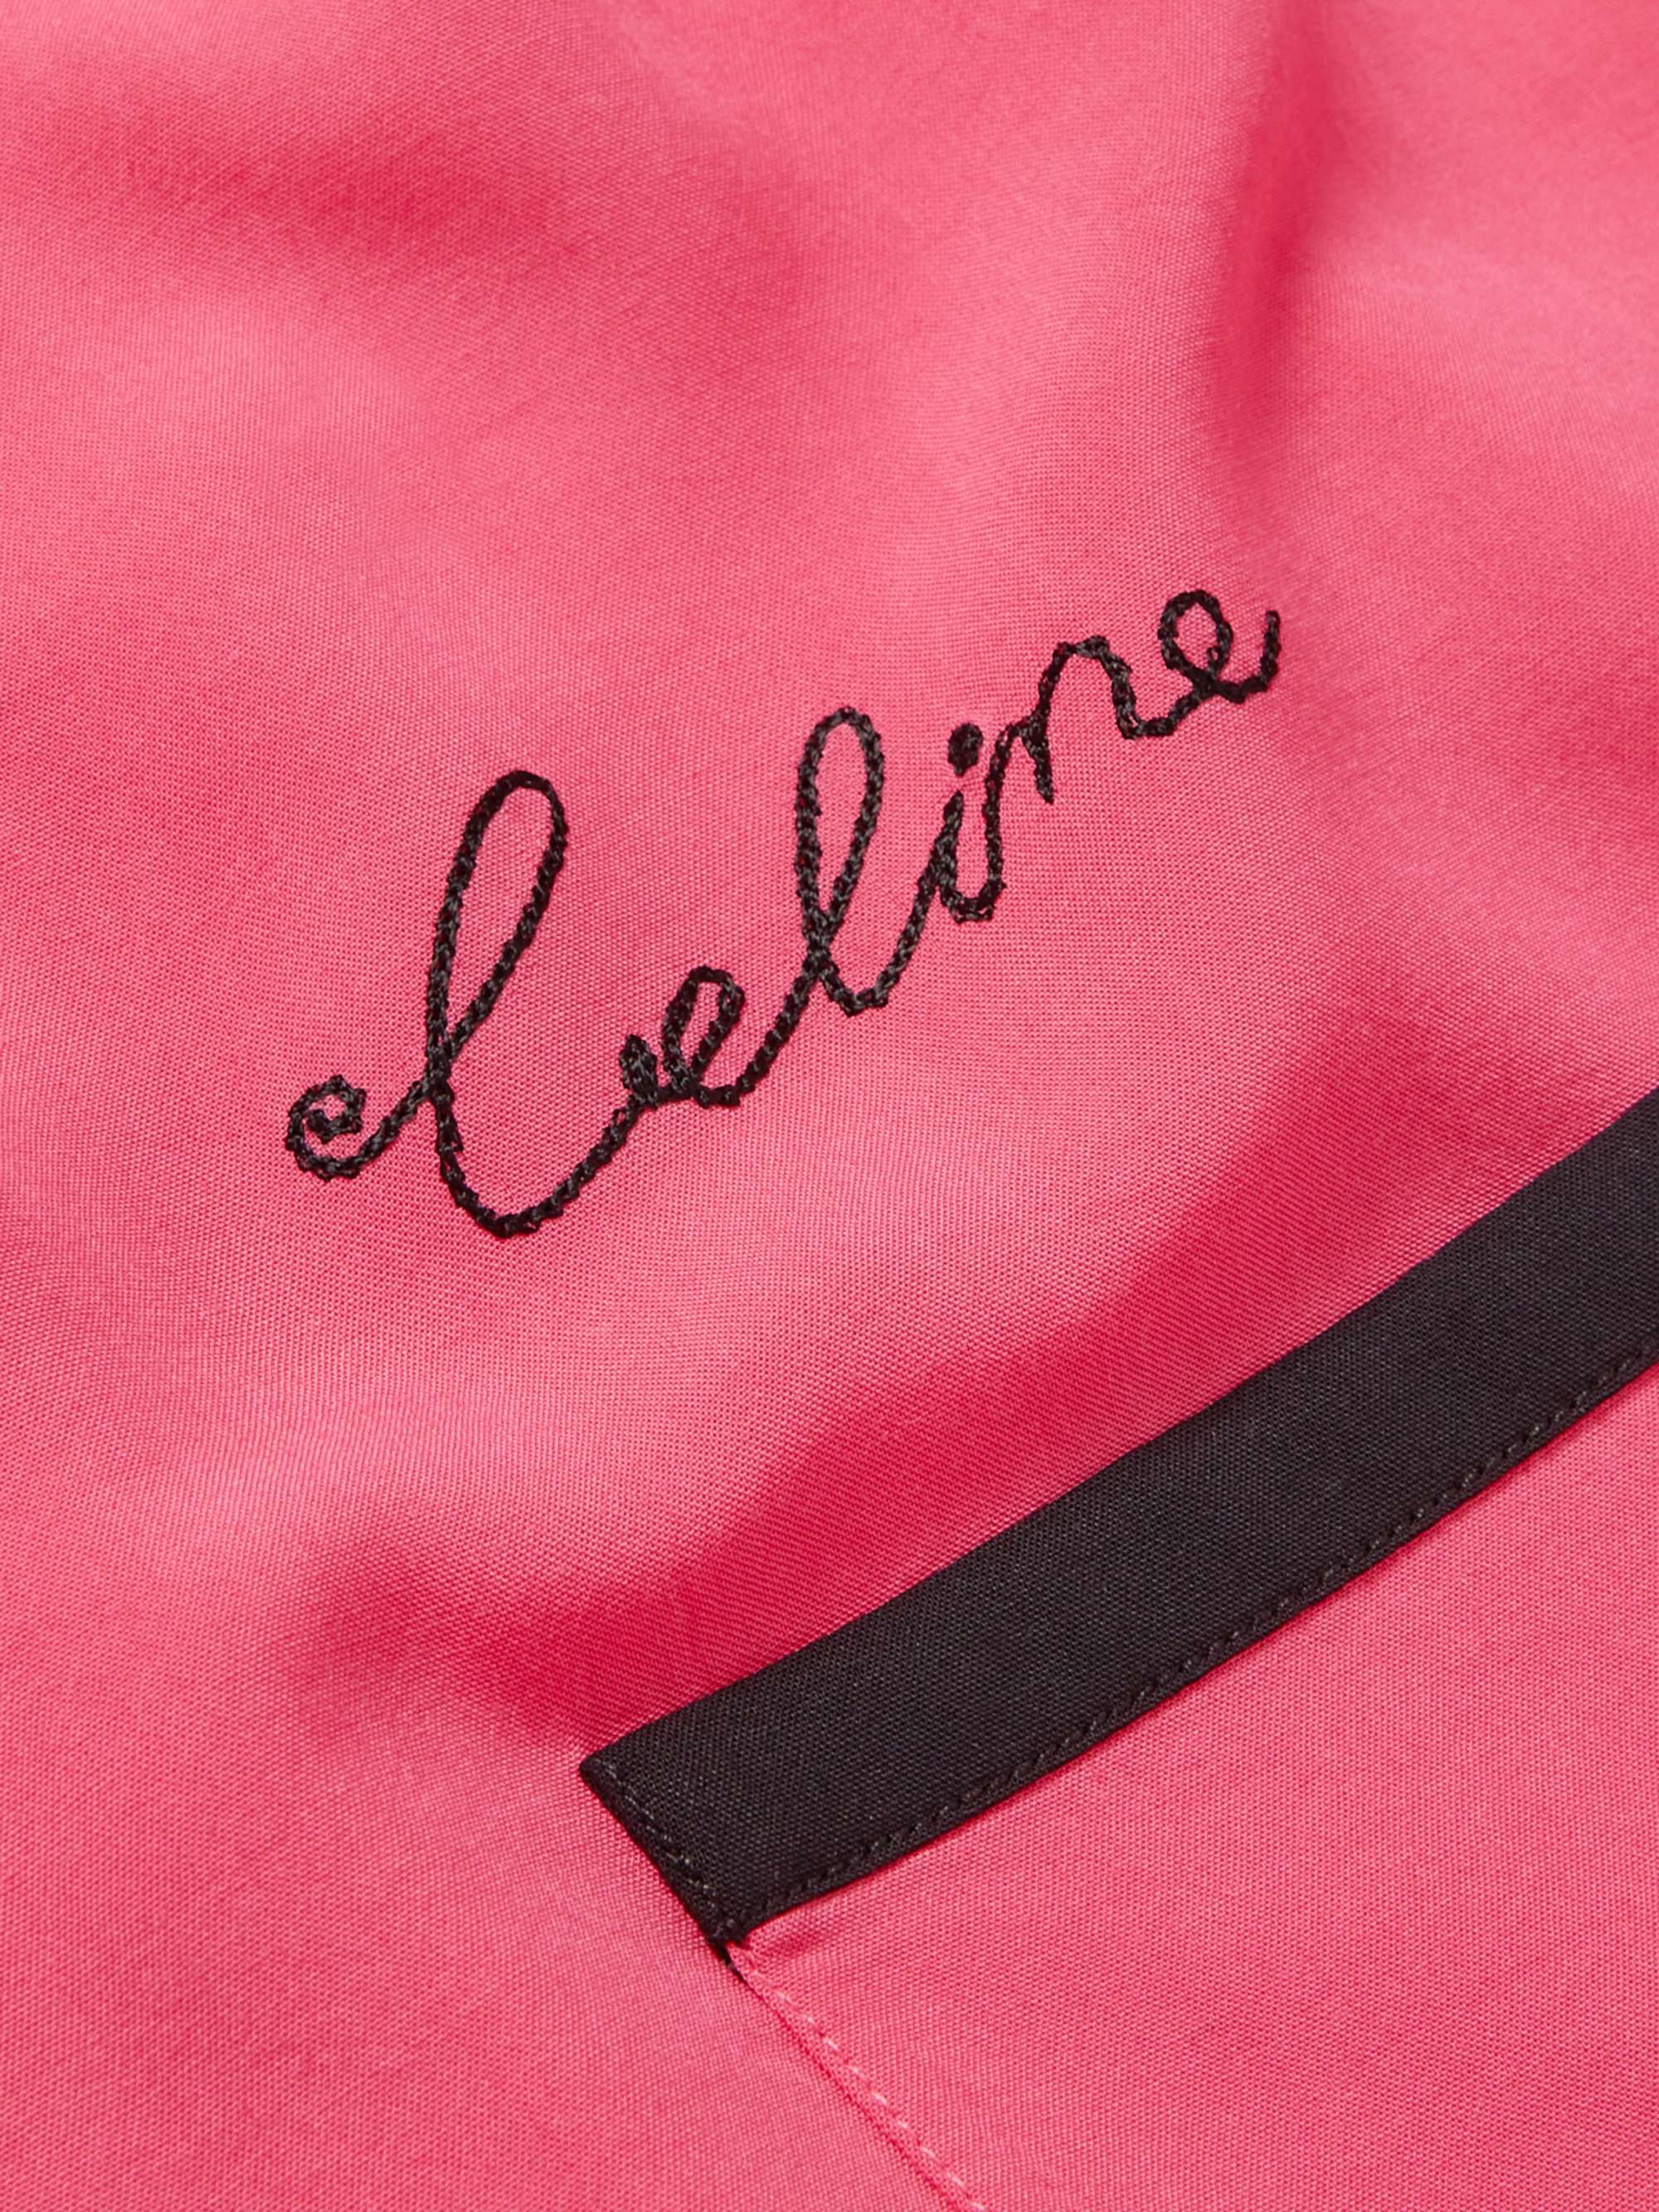 CELINE HOMME Camp-Collar Logo-Embroidered Twill Shirt